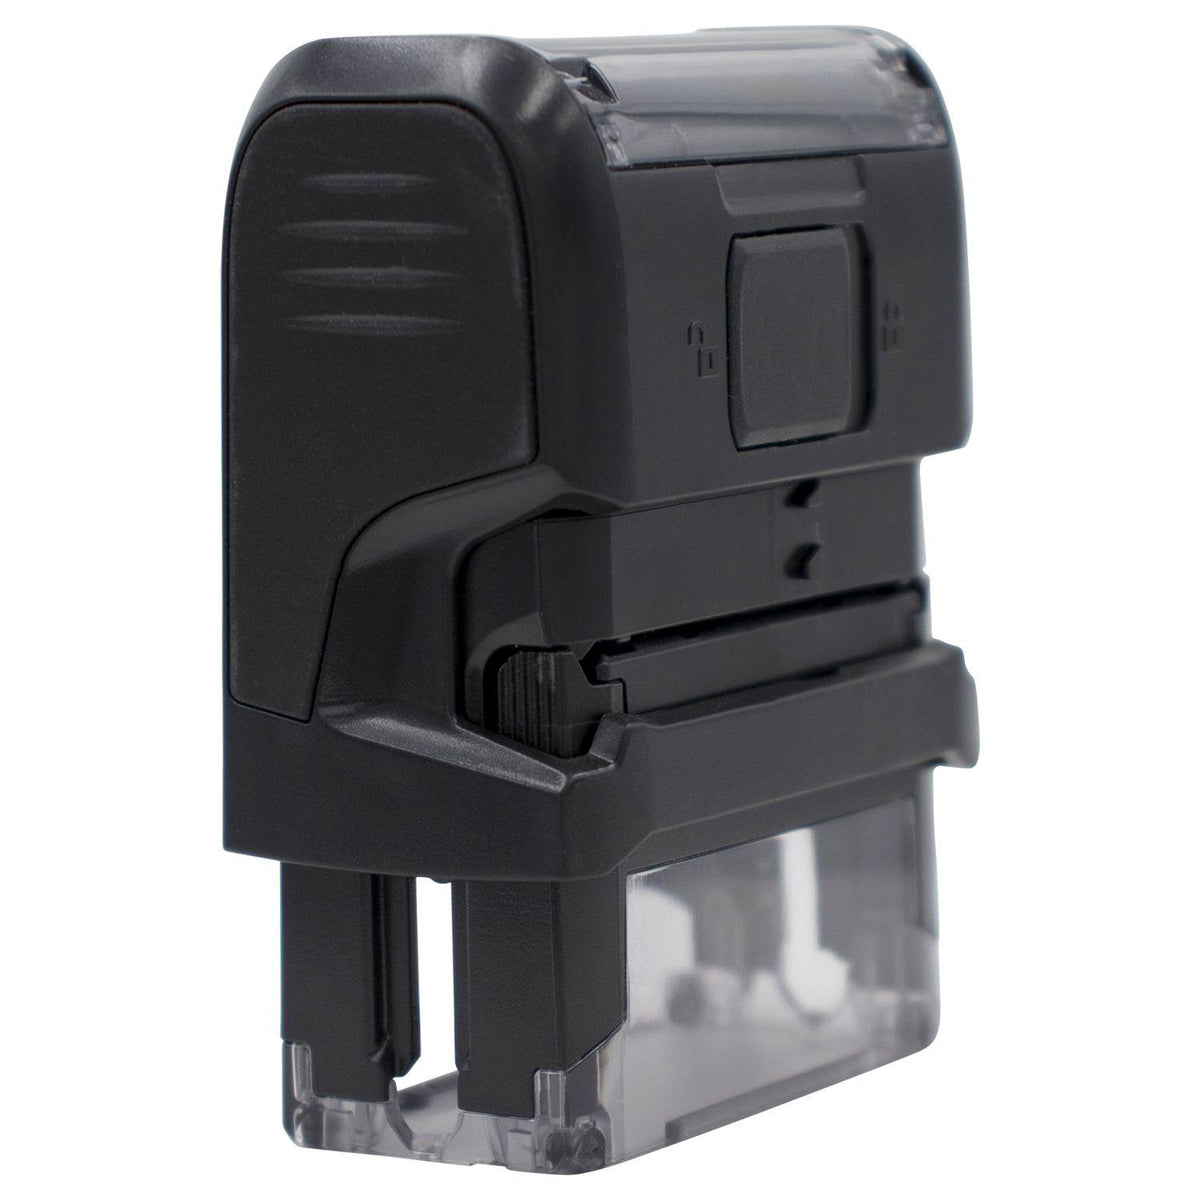 Large Self Inking Authorizations Revoked Stamp Back View